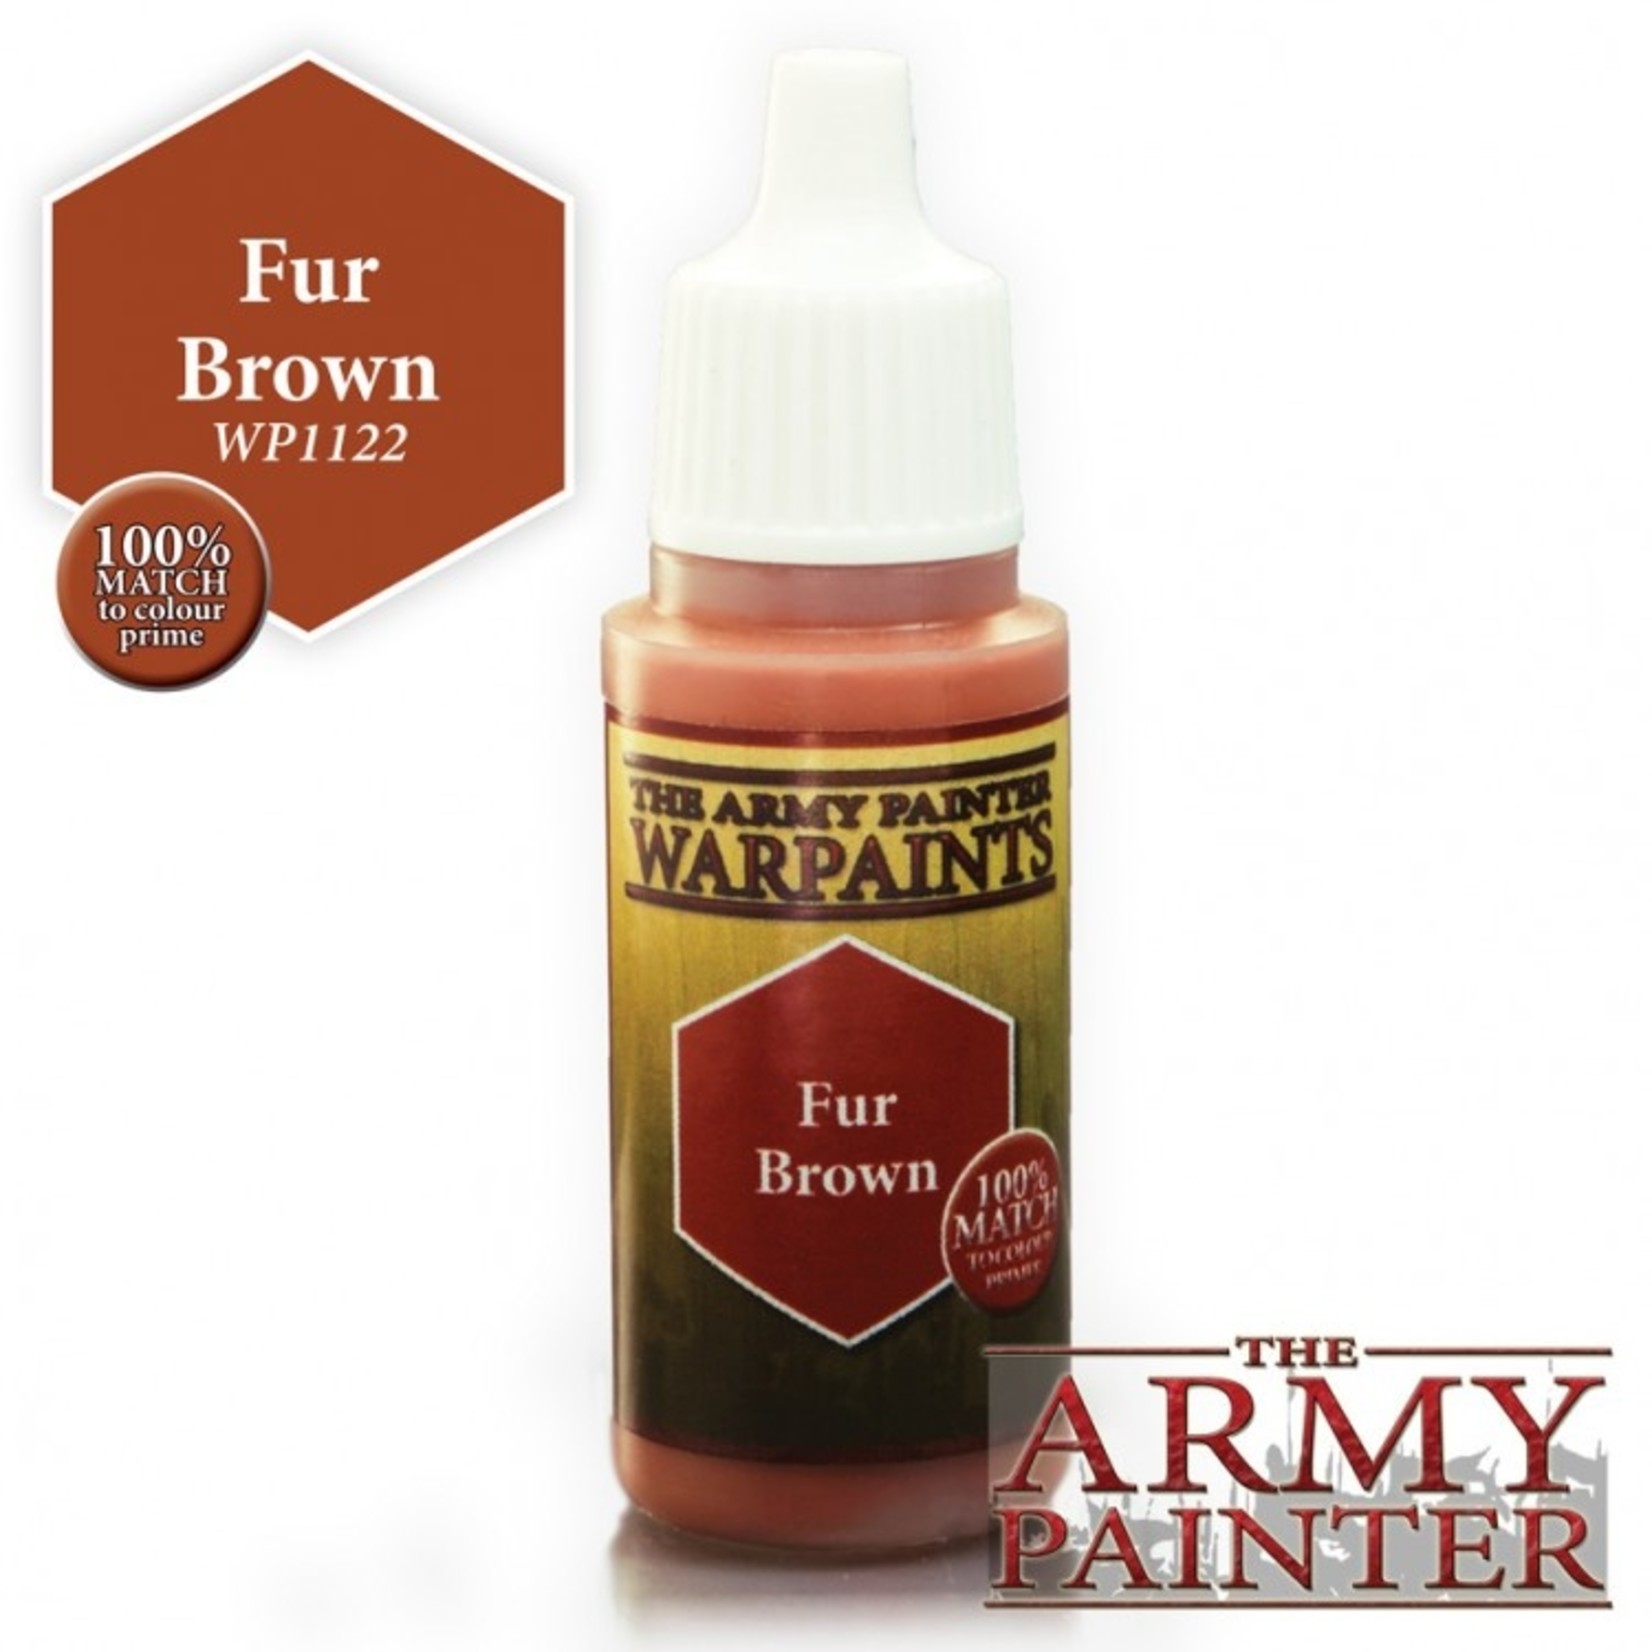 The Army Painter The Army Painter Fur Brown 18ml